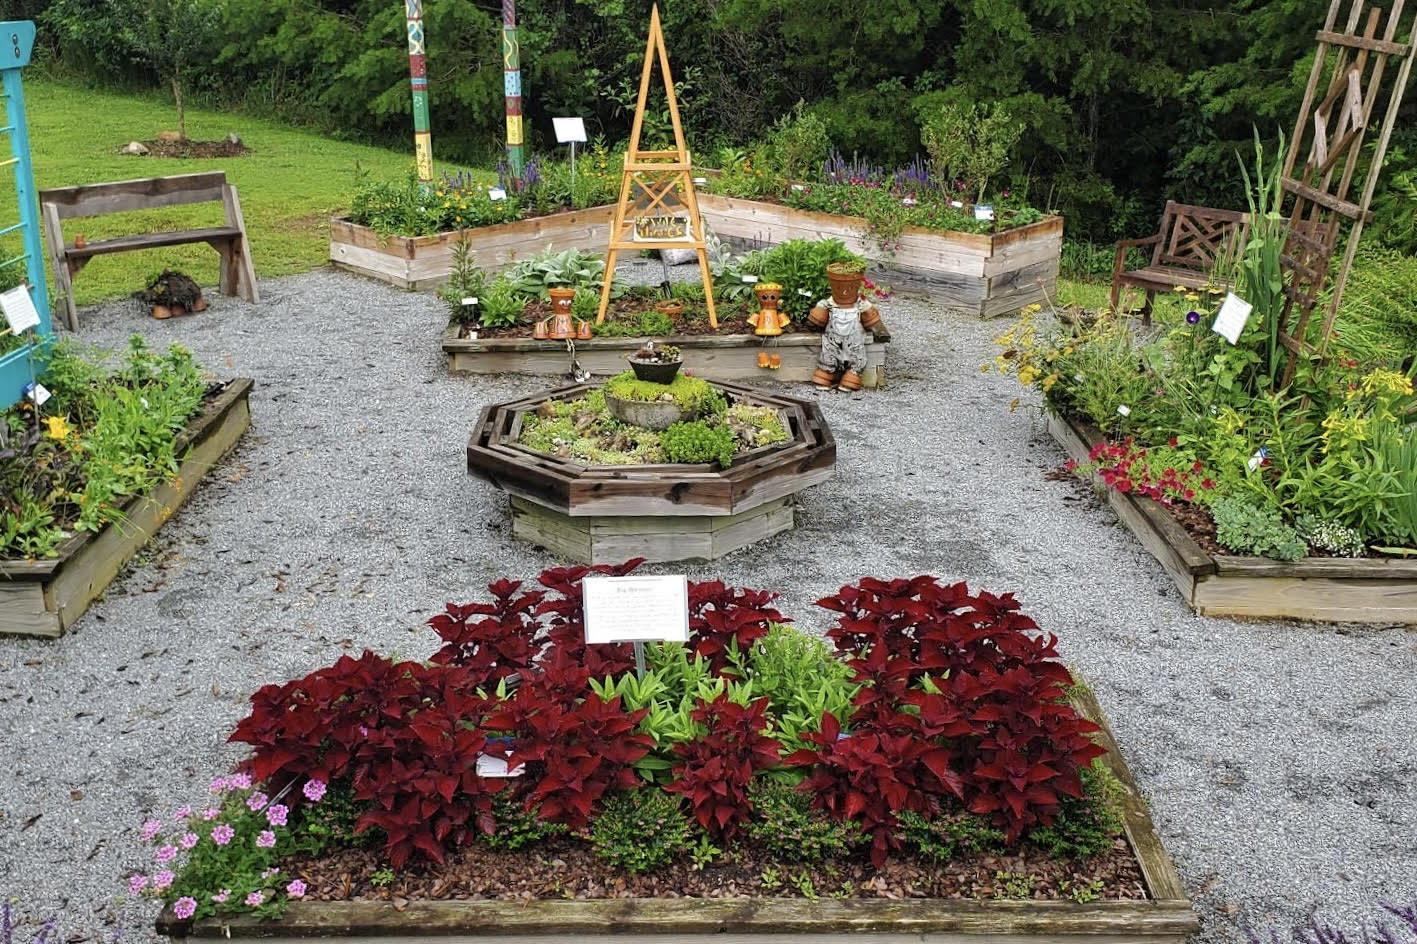 Demonstration gardens provide examples of things people can create in their own gardens.